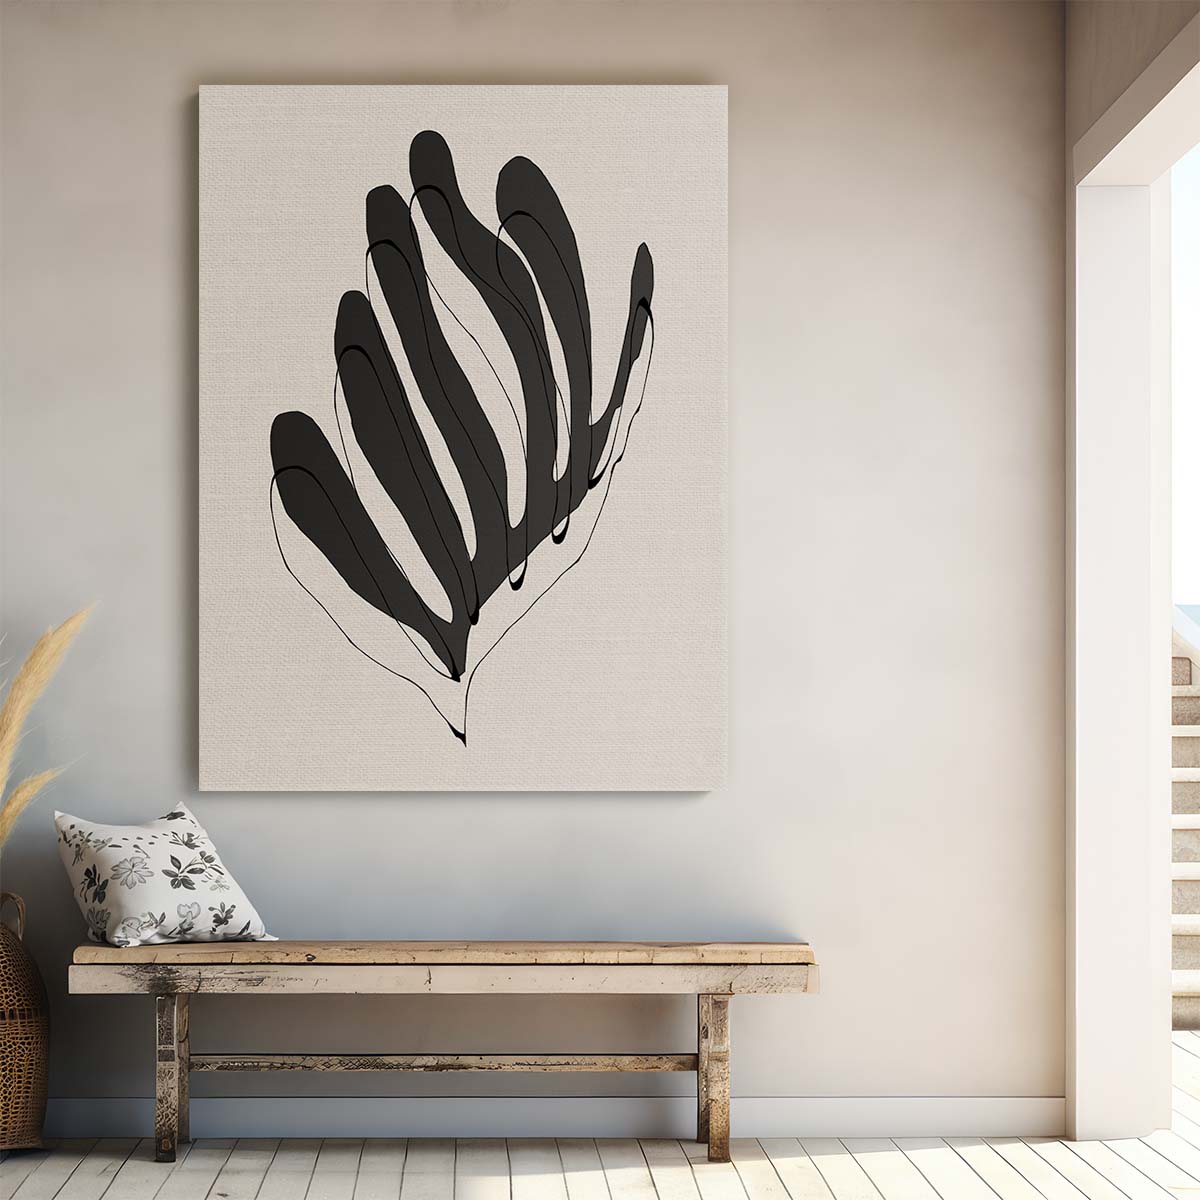 Minimalist Matisse-Inspired Floral Illustration by MIUUS Studio by Luxuriance Designs, made in USA